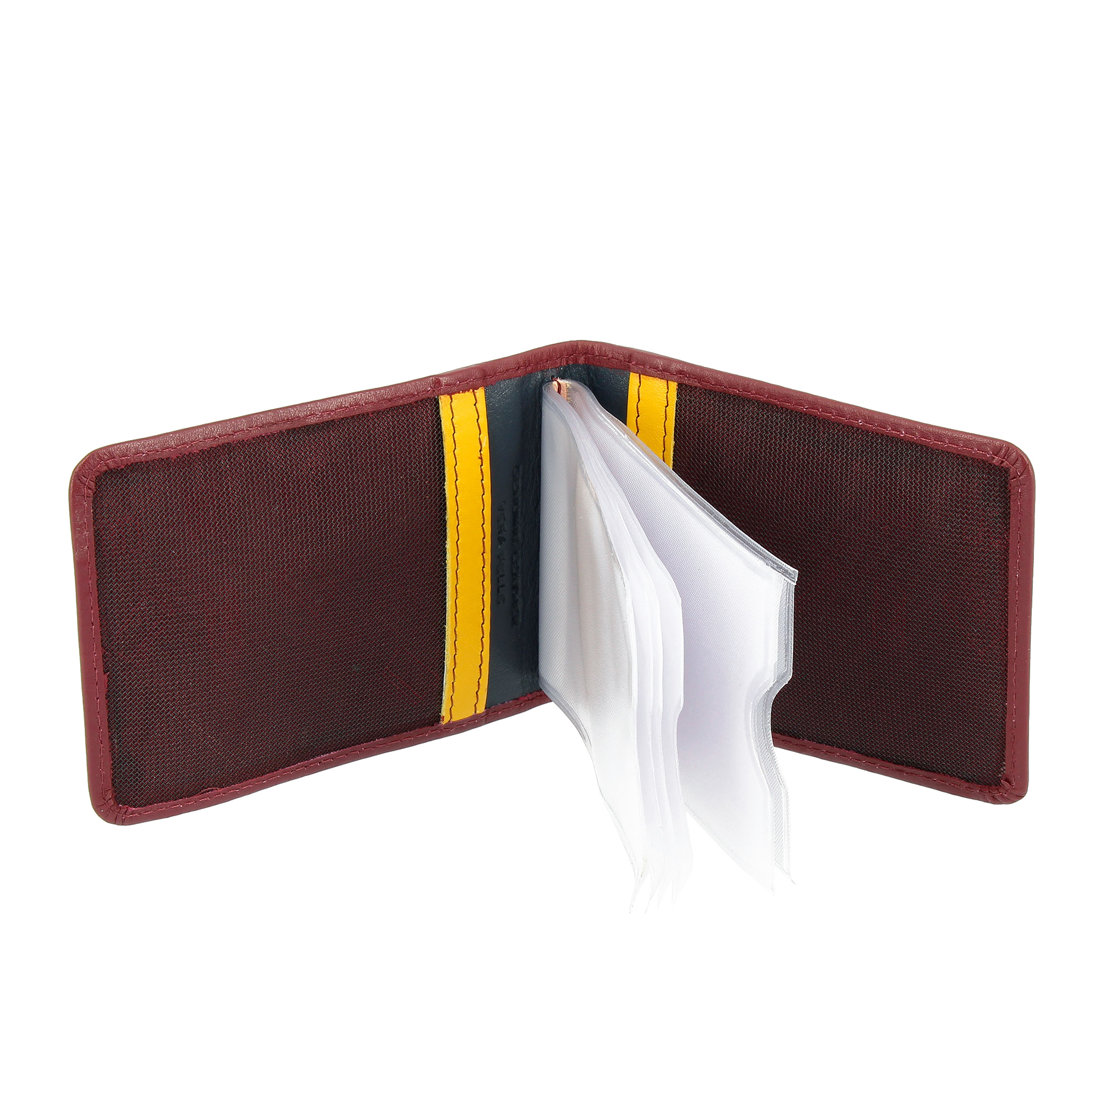 Unisex multicolour leather credit card holder carrier by DUDU